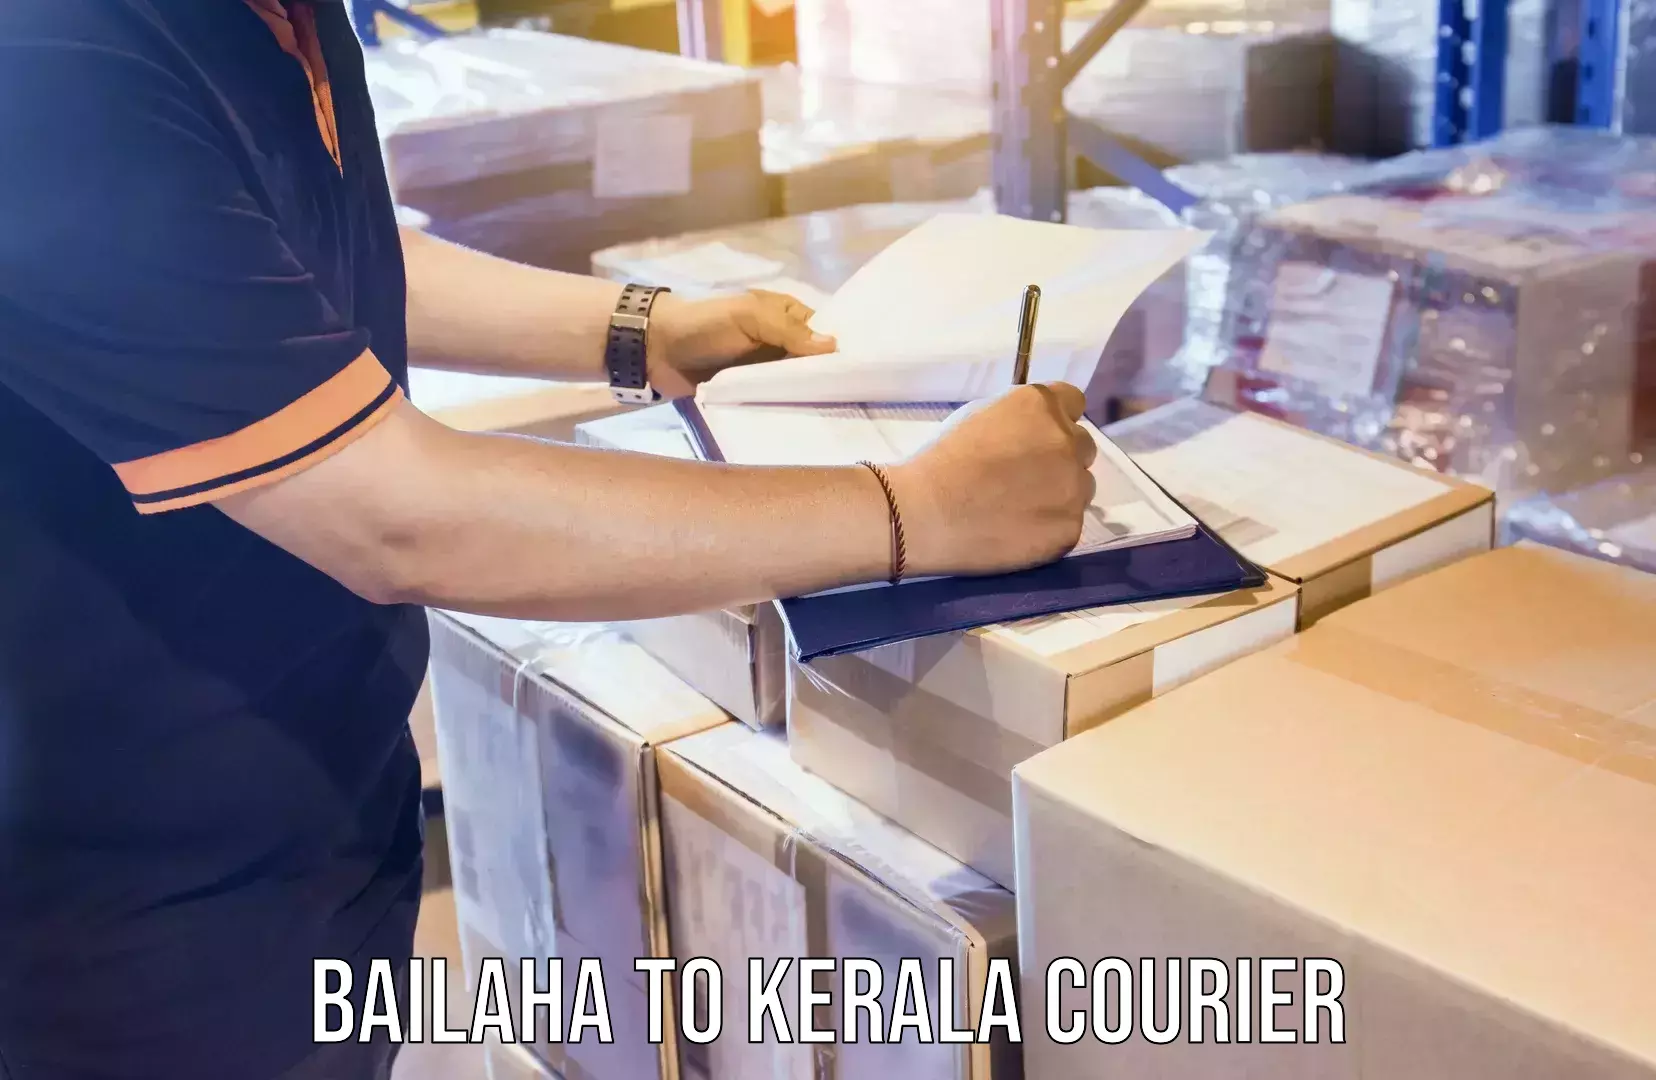 Nationwide parcel services Bailaha to Kerala